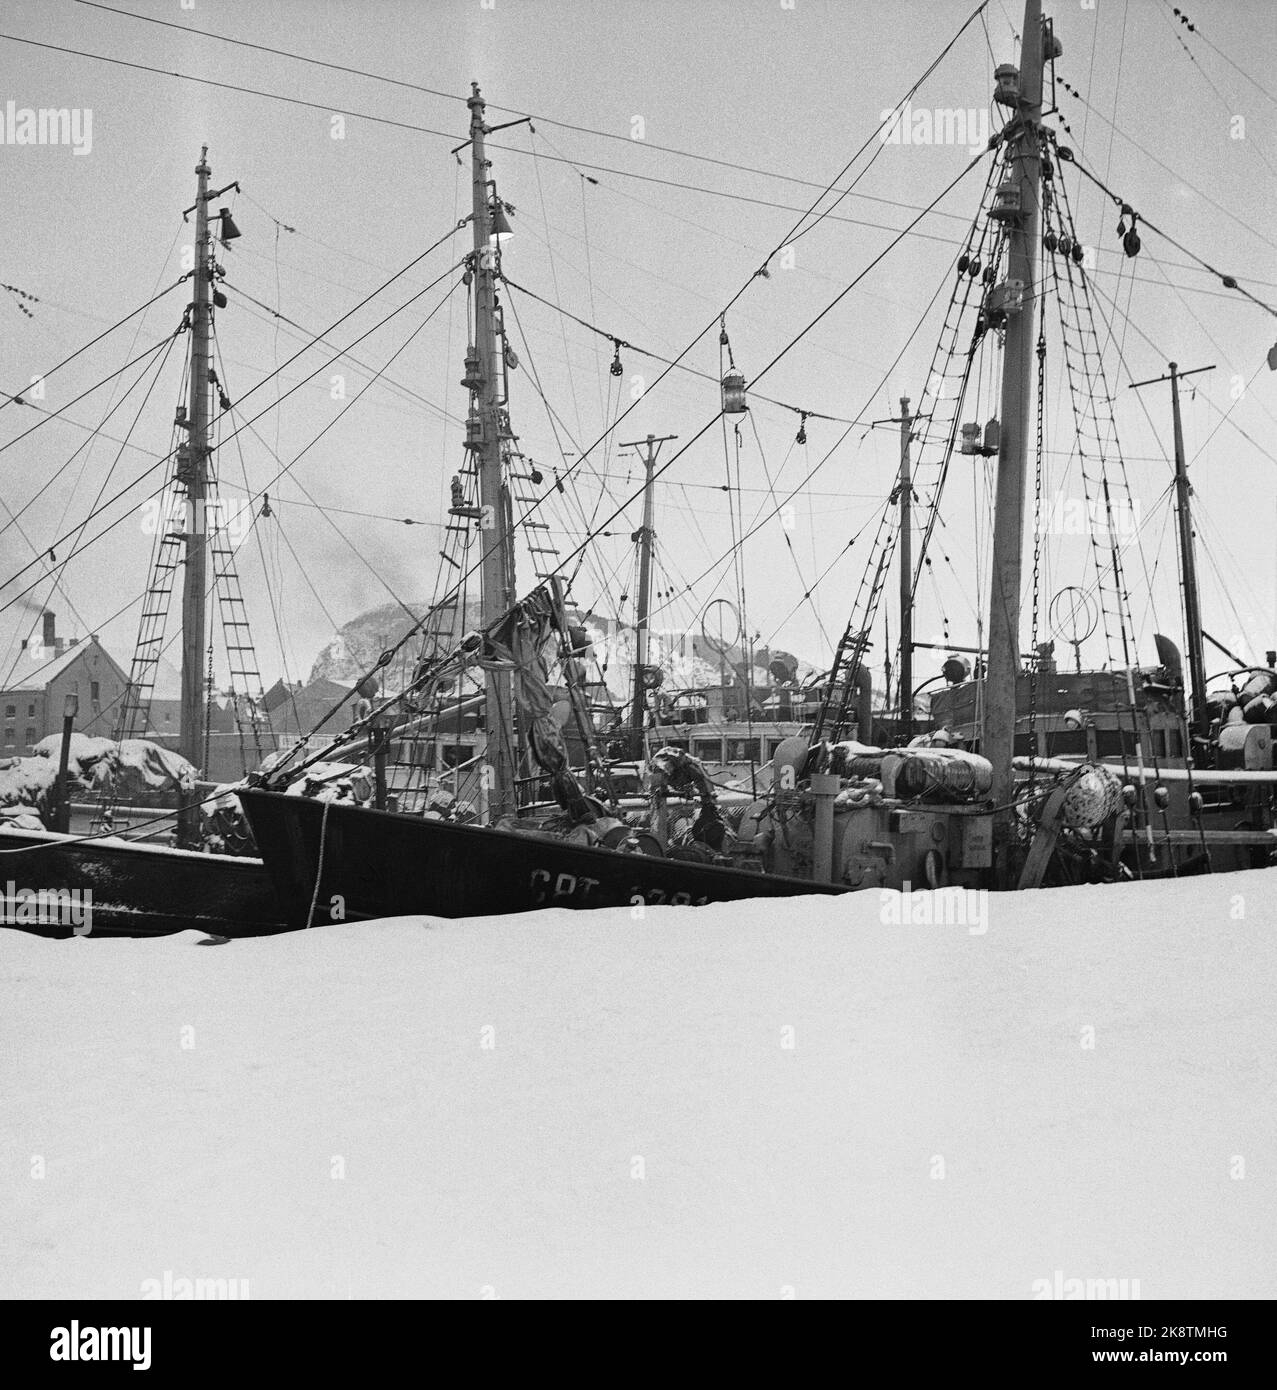 Ålesund February 1, 1956. 13 Russian trawlers and a mother ship were brought up by the Norwegian Coast Guard and brought to Ålesund after they and several other Russian ships had a thieves in the Norwegian sector. The Coast Guard had to shoot warning shots before the Russians were arrested. Norway sent sharp protests to the Soviet Union and Foreign Minister Lange convened the Soviet ambassador in Oslo to emphasize that the Norwegian authorities saw this as a gross violation of Norwegian waters. Here are some of the trawlers. Photo: Current / NTB Stock Photo